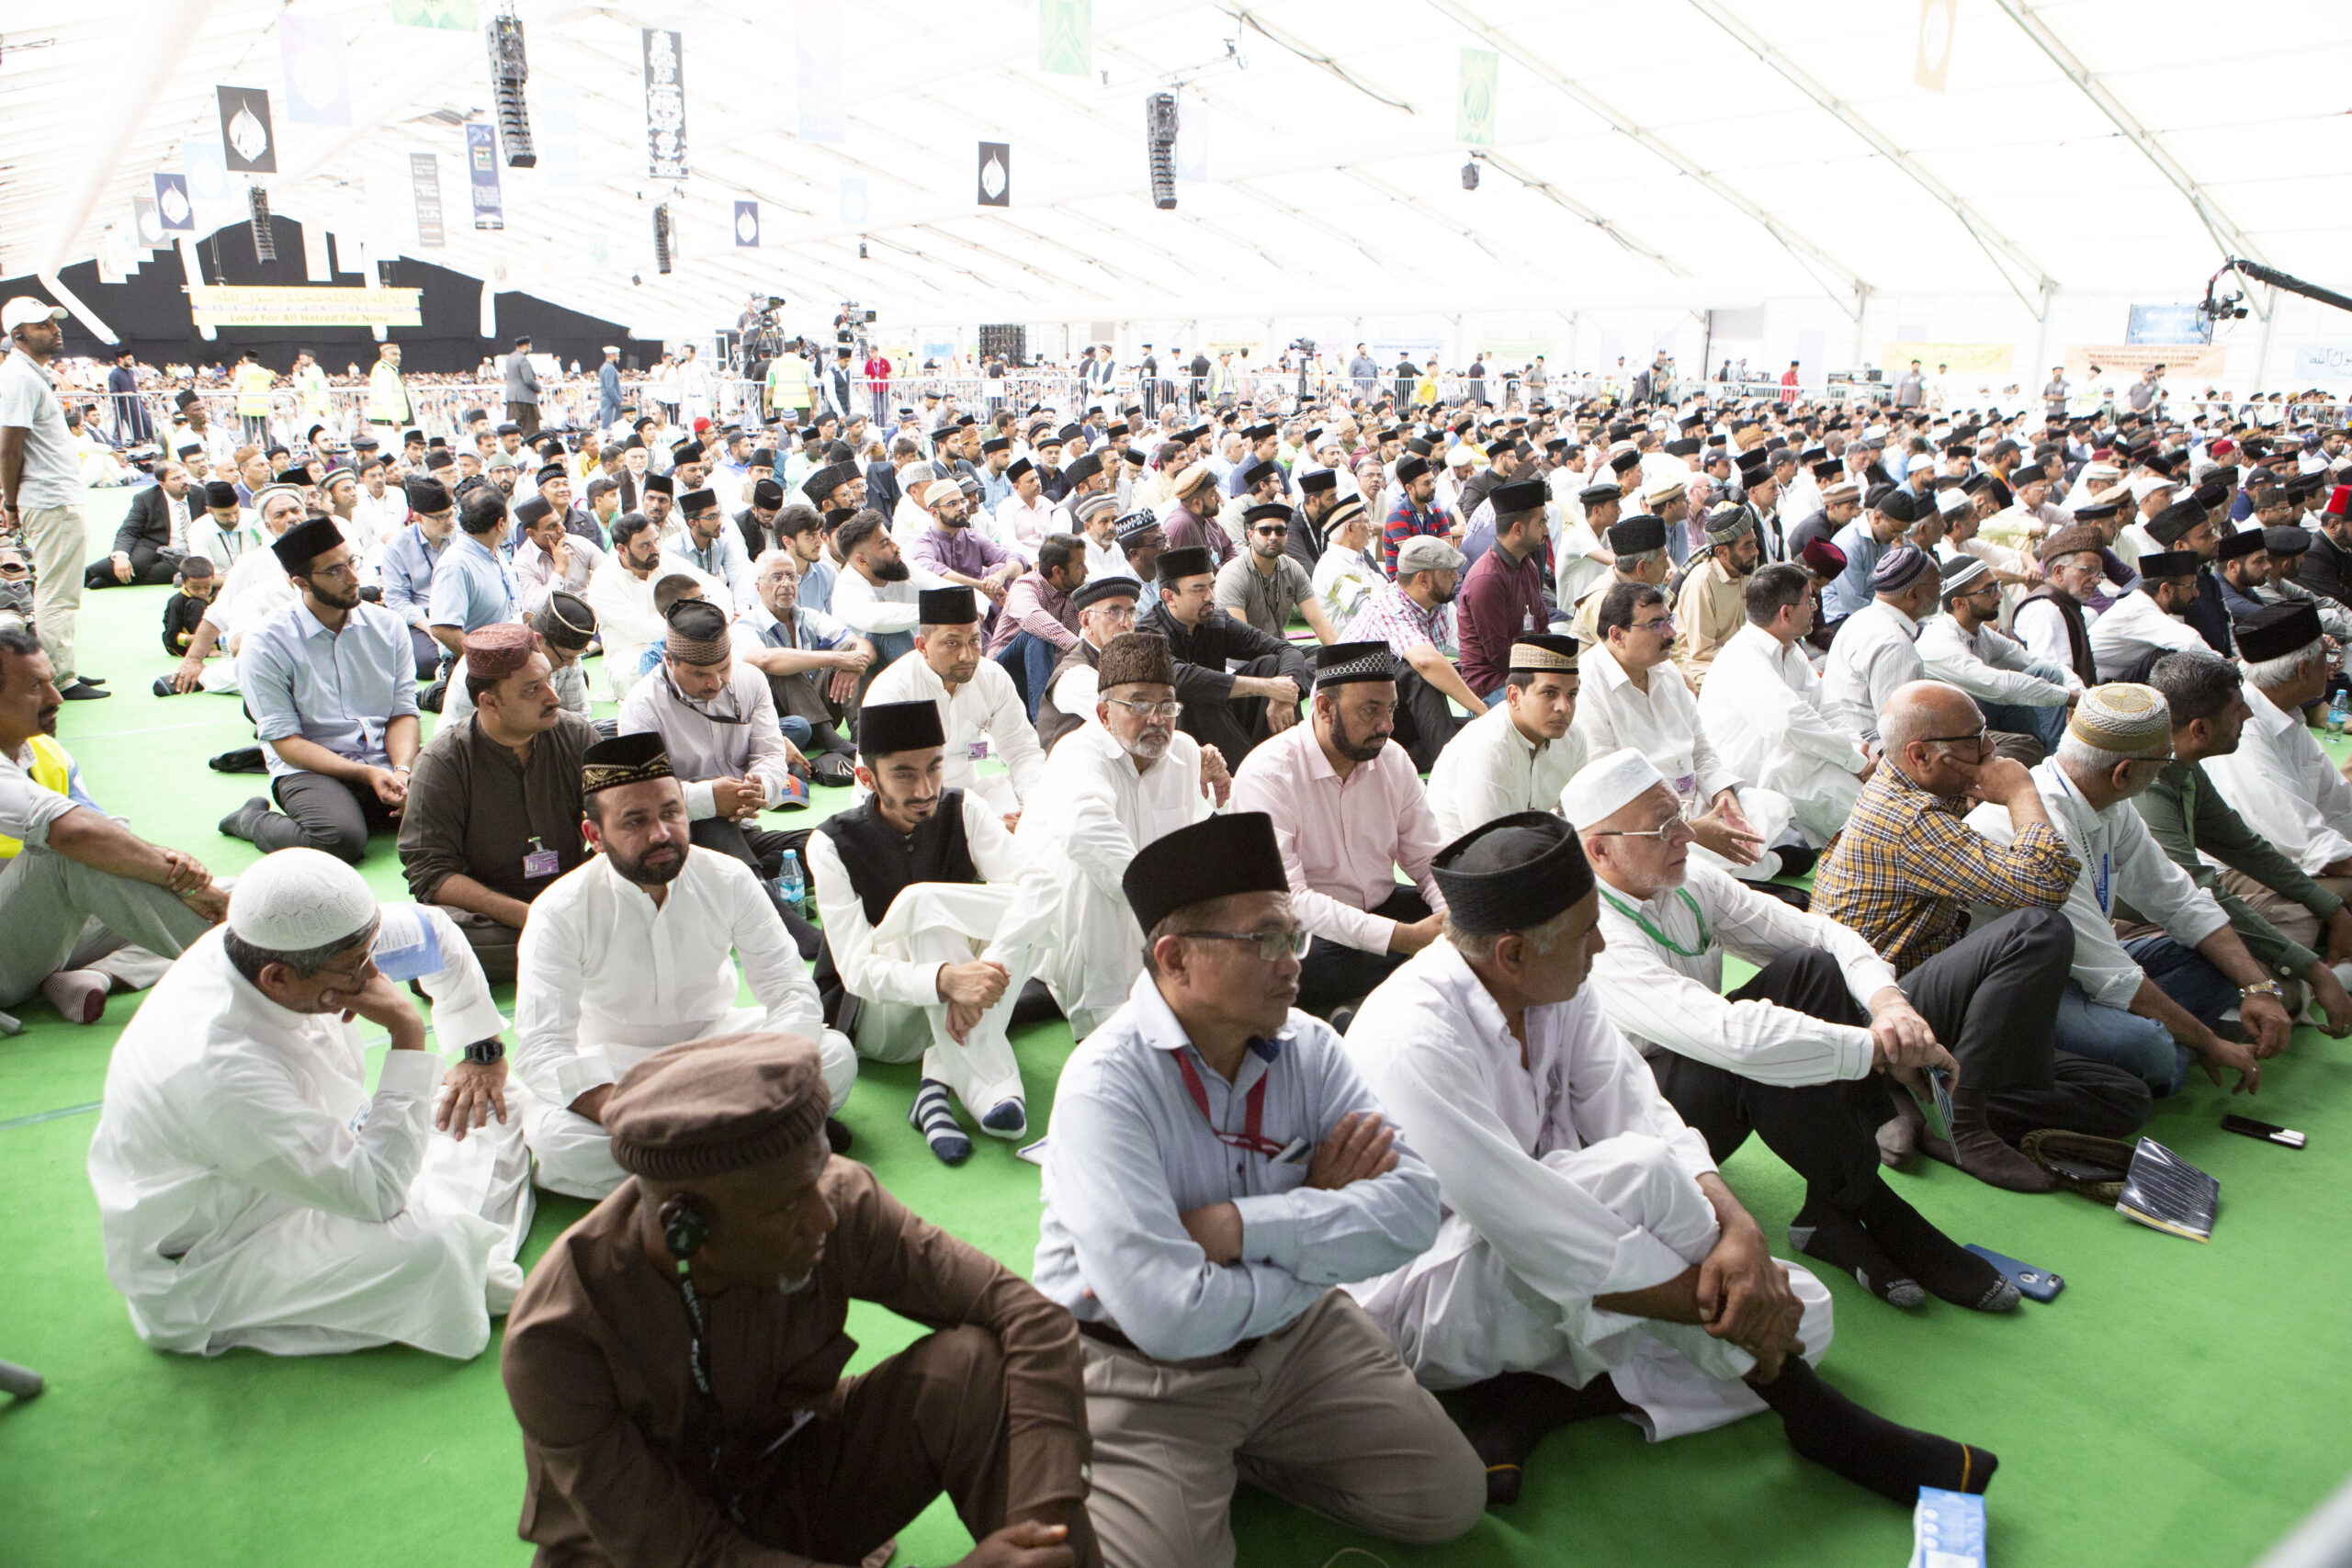 Ahmadiyya Holds Annual Convention In UK